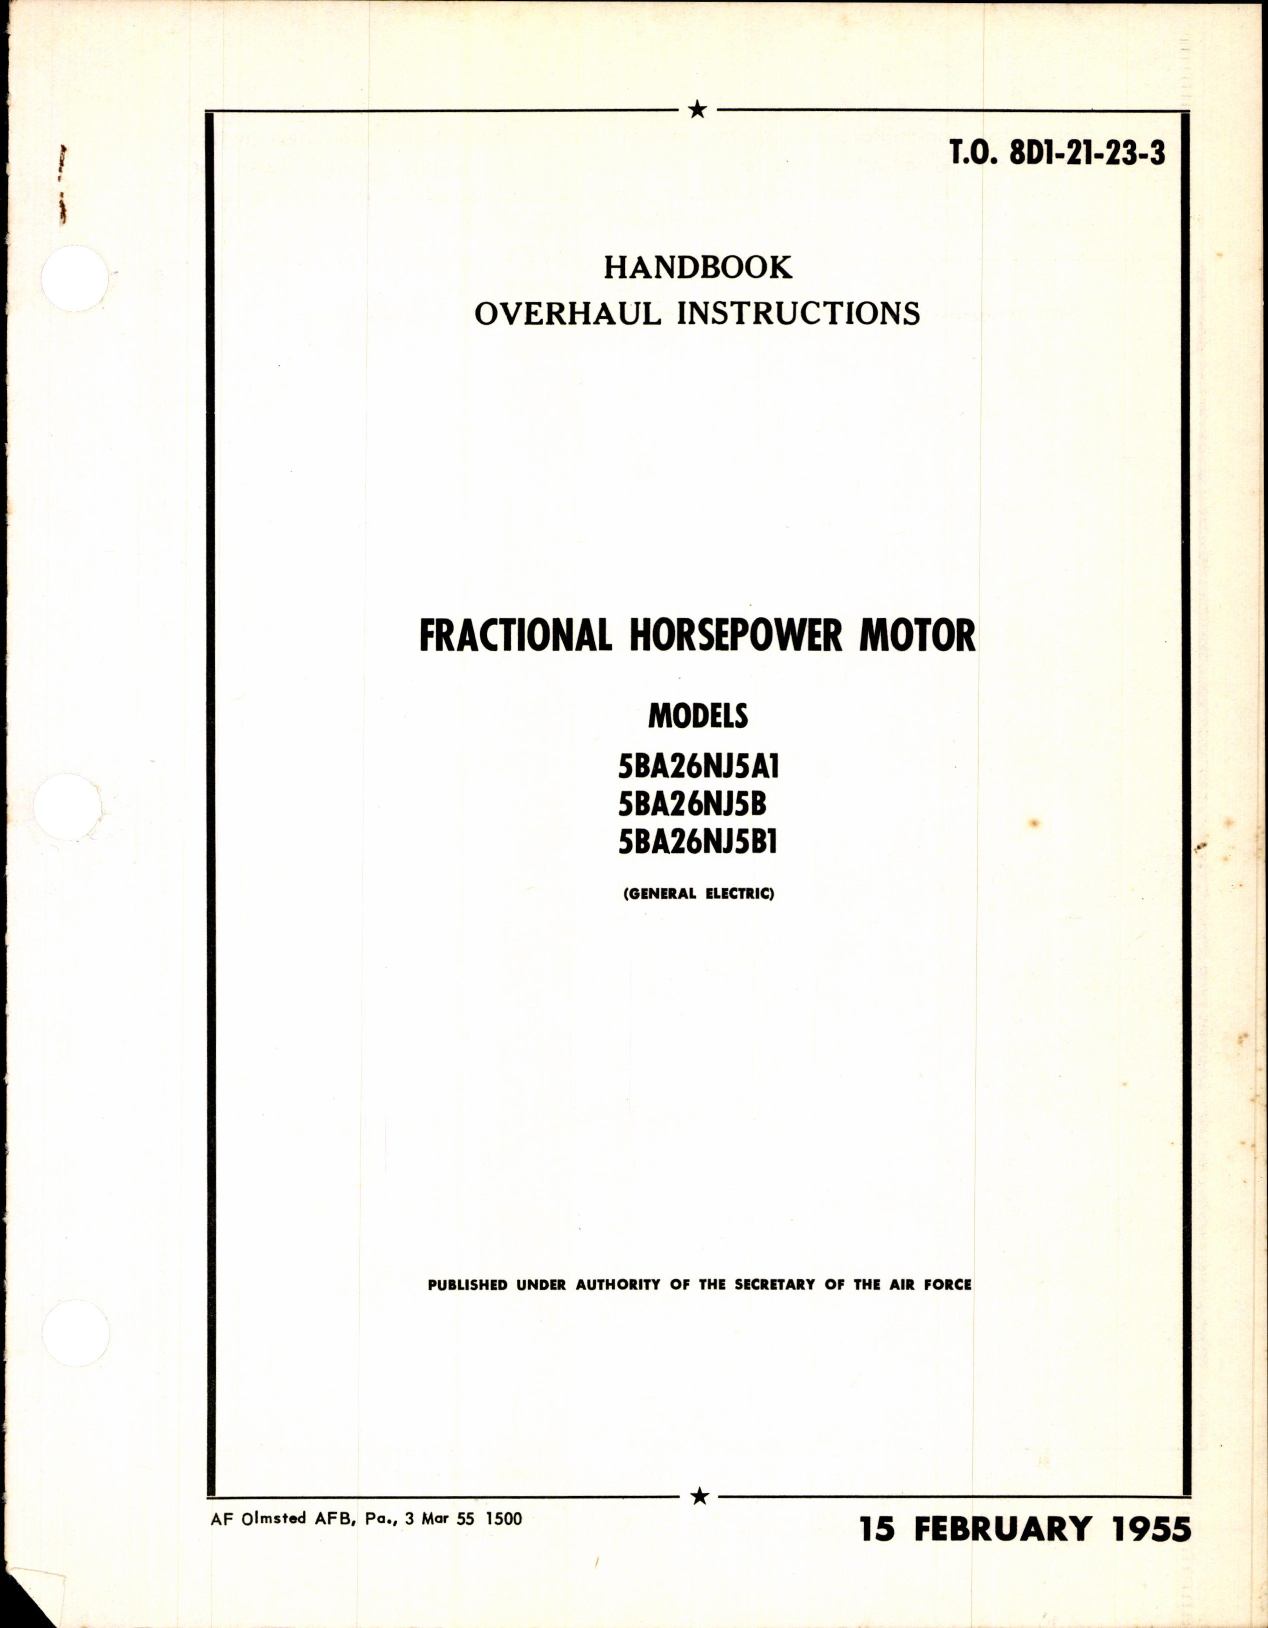 Sample page 1 from AirCorps Library document: Overhaul Instructions for Fractional Horsepower Motor